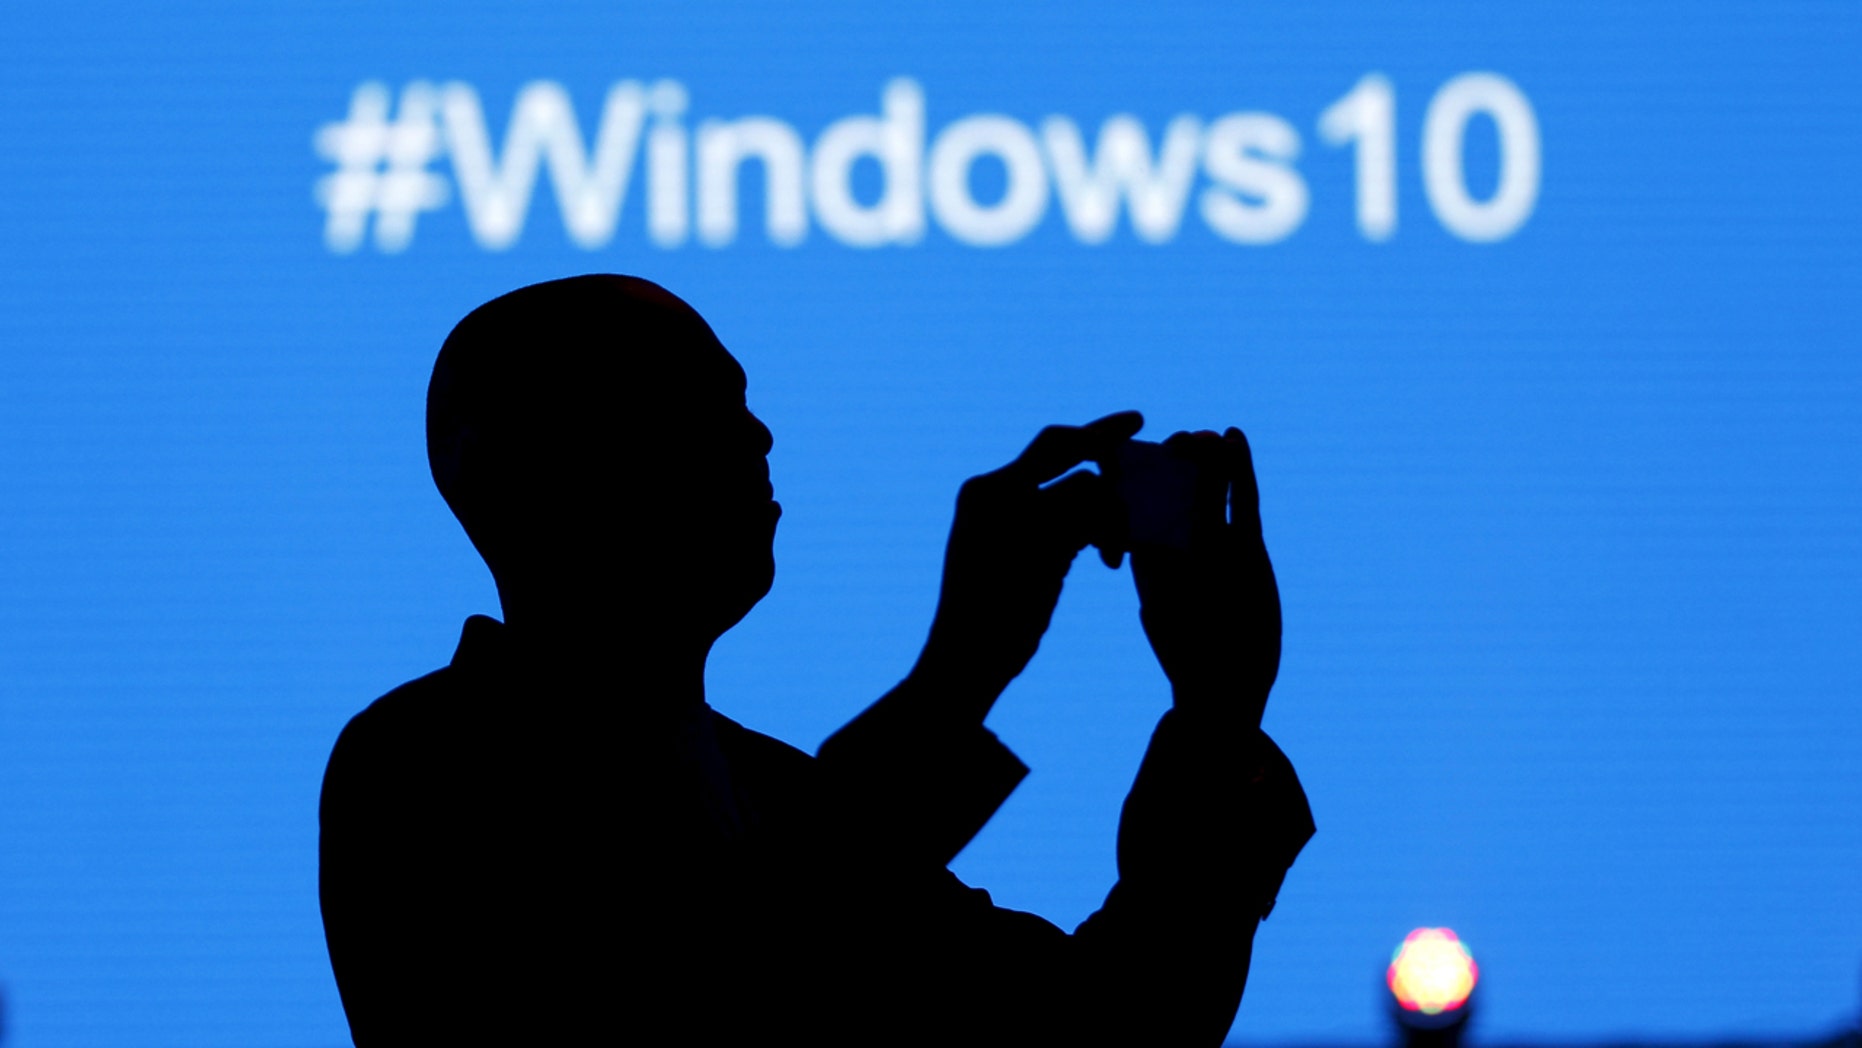 A Microsoft delegate takes a photo during the launch of the Windows 10 operating system in Nairobi, the capital of Kenya, July 29, 2015 - file photo.